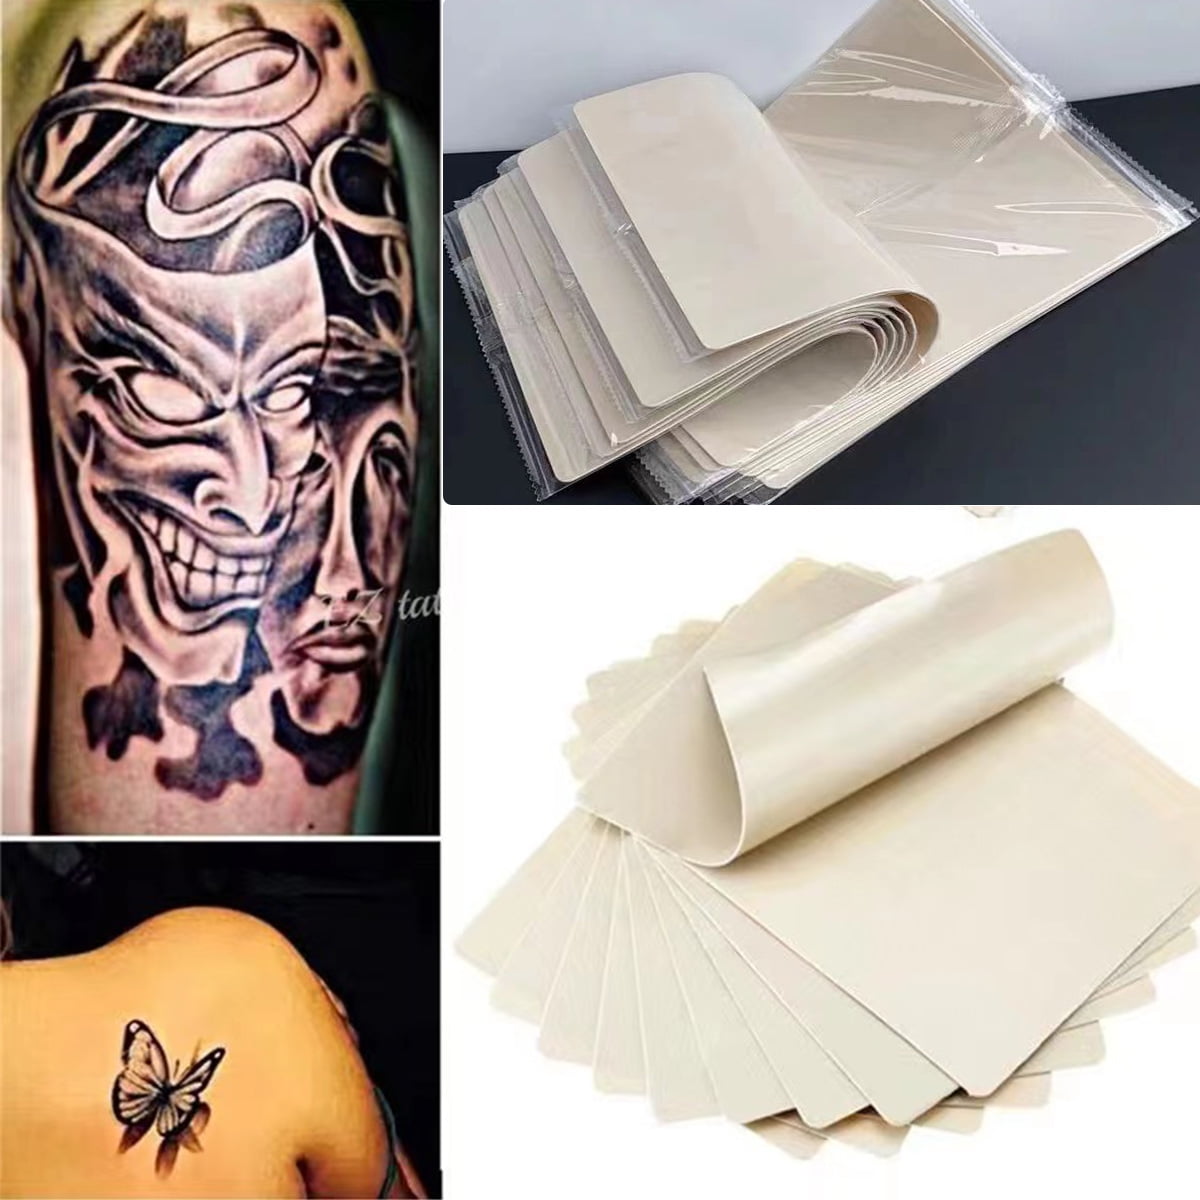 Blank Tattoo Skin Practice - 5 Sheets Fake Skin Double Sides 8x6 Tattooing  and Microblading Eyebrow Practice Skin for Tattoo Supplies Tattoo Kit 